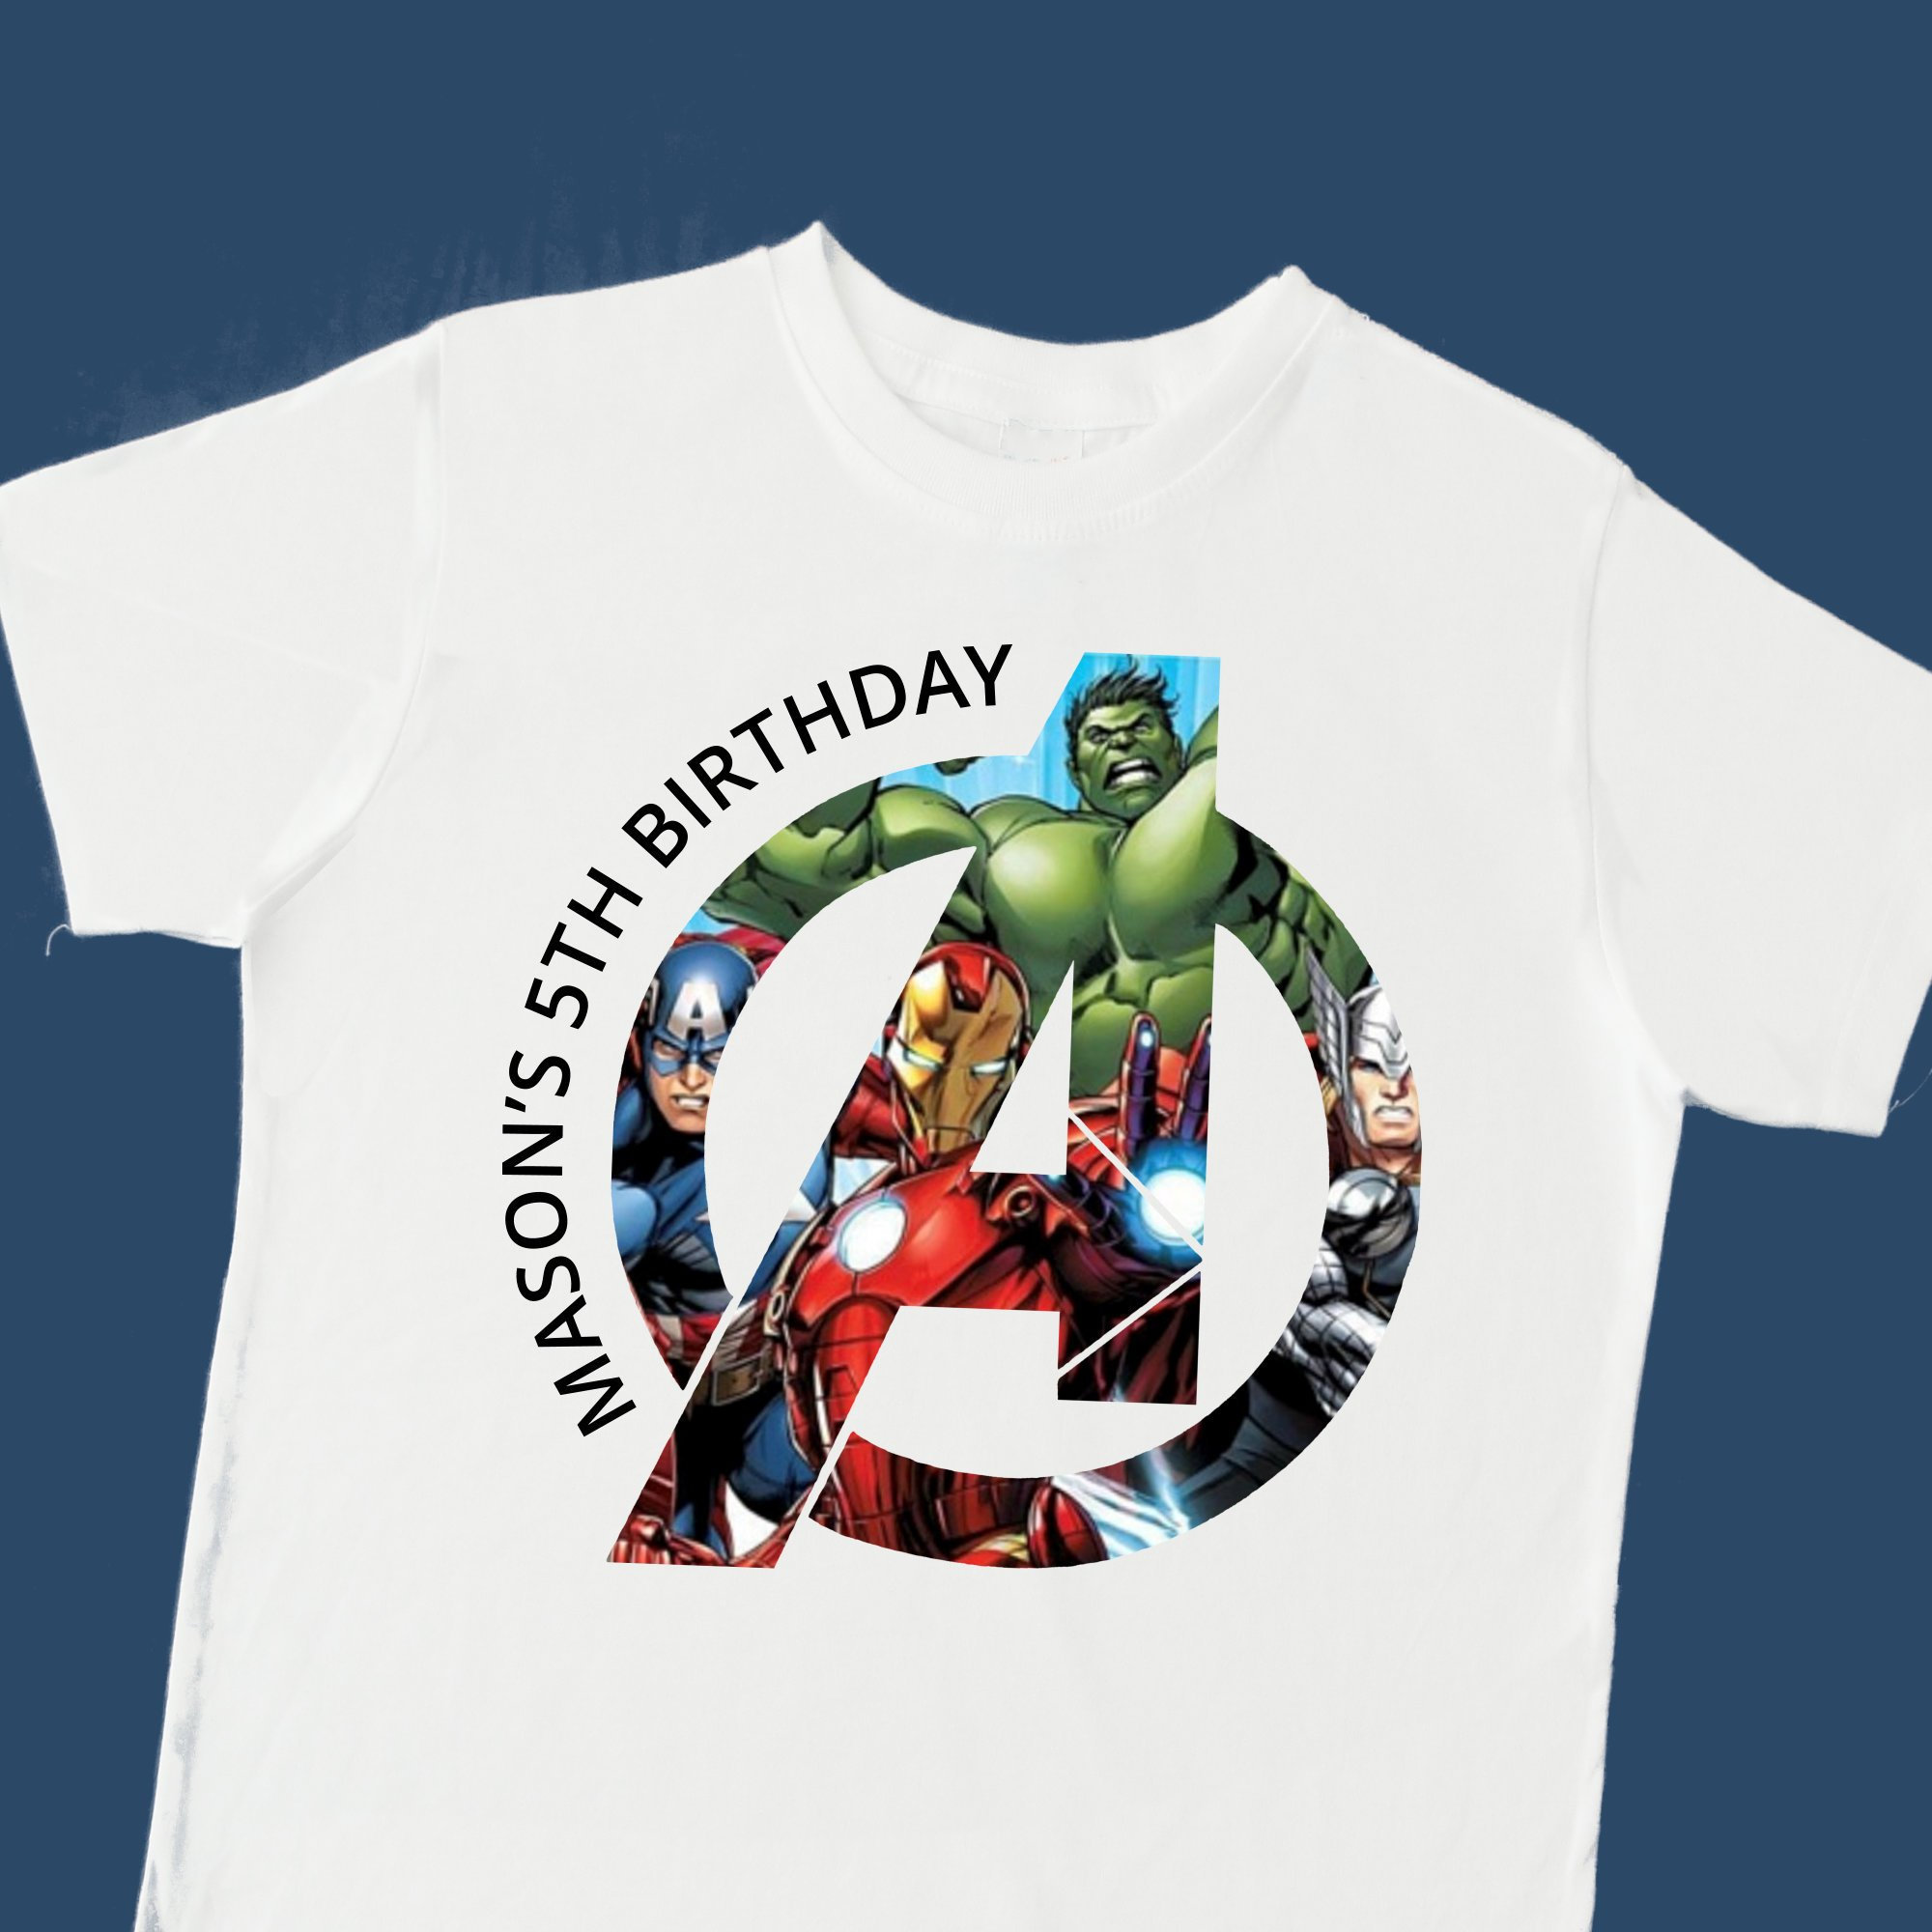 Details about   Avengers Birthday Shirt Superhero Birthday Shirt Avengers Tee Superhero Shirt